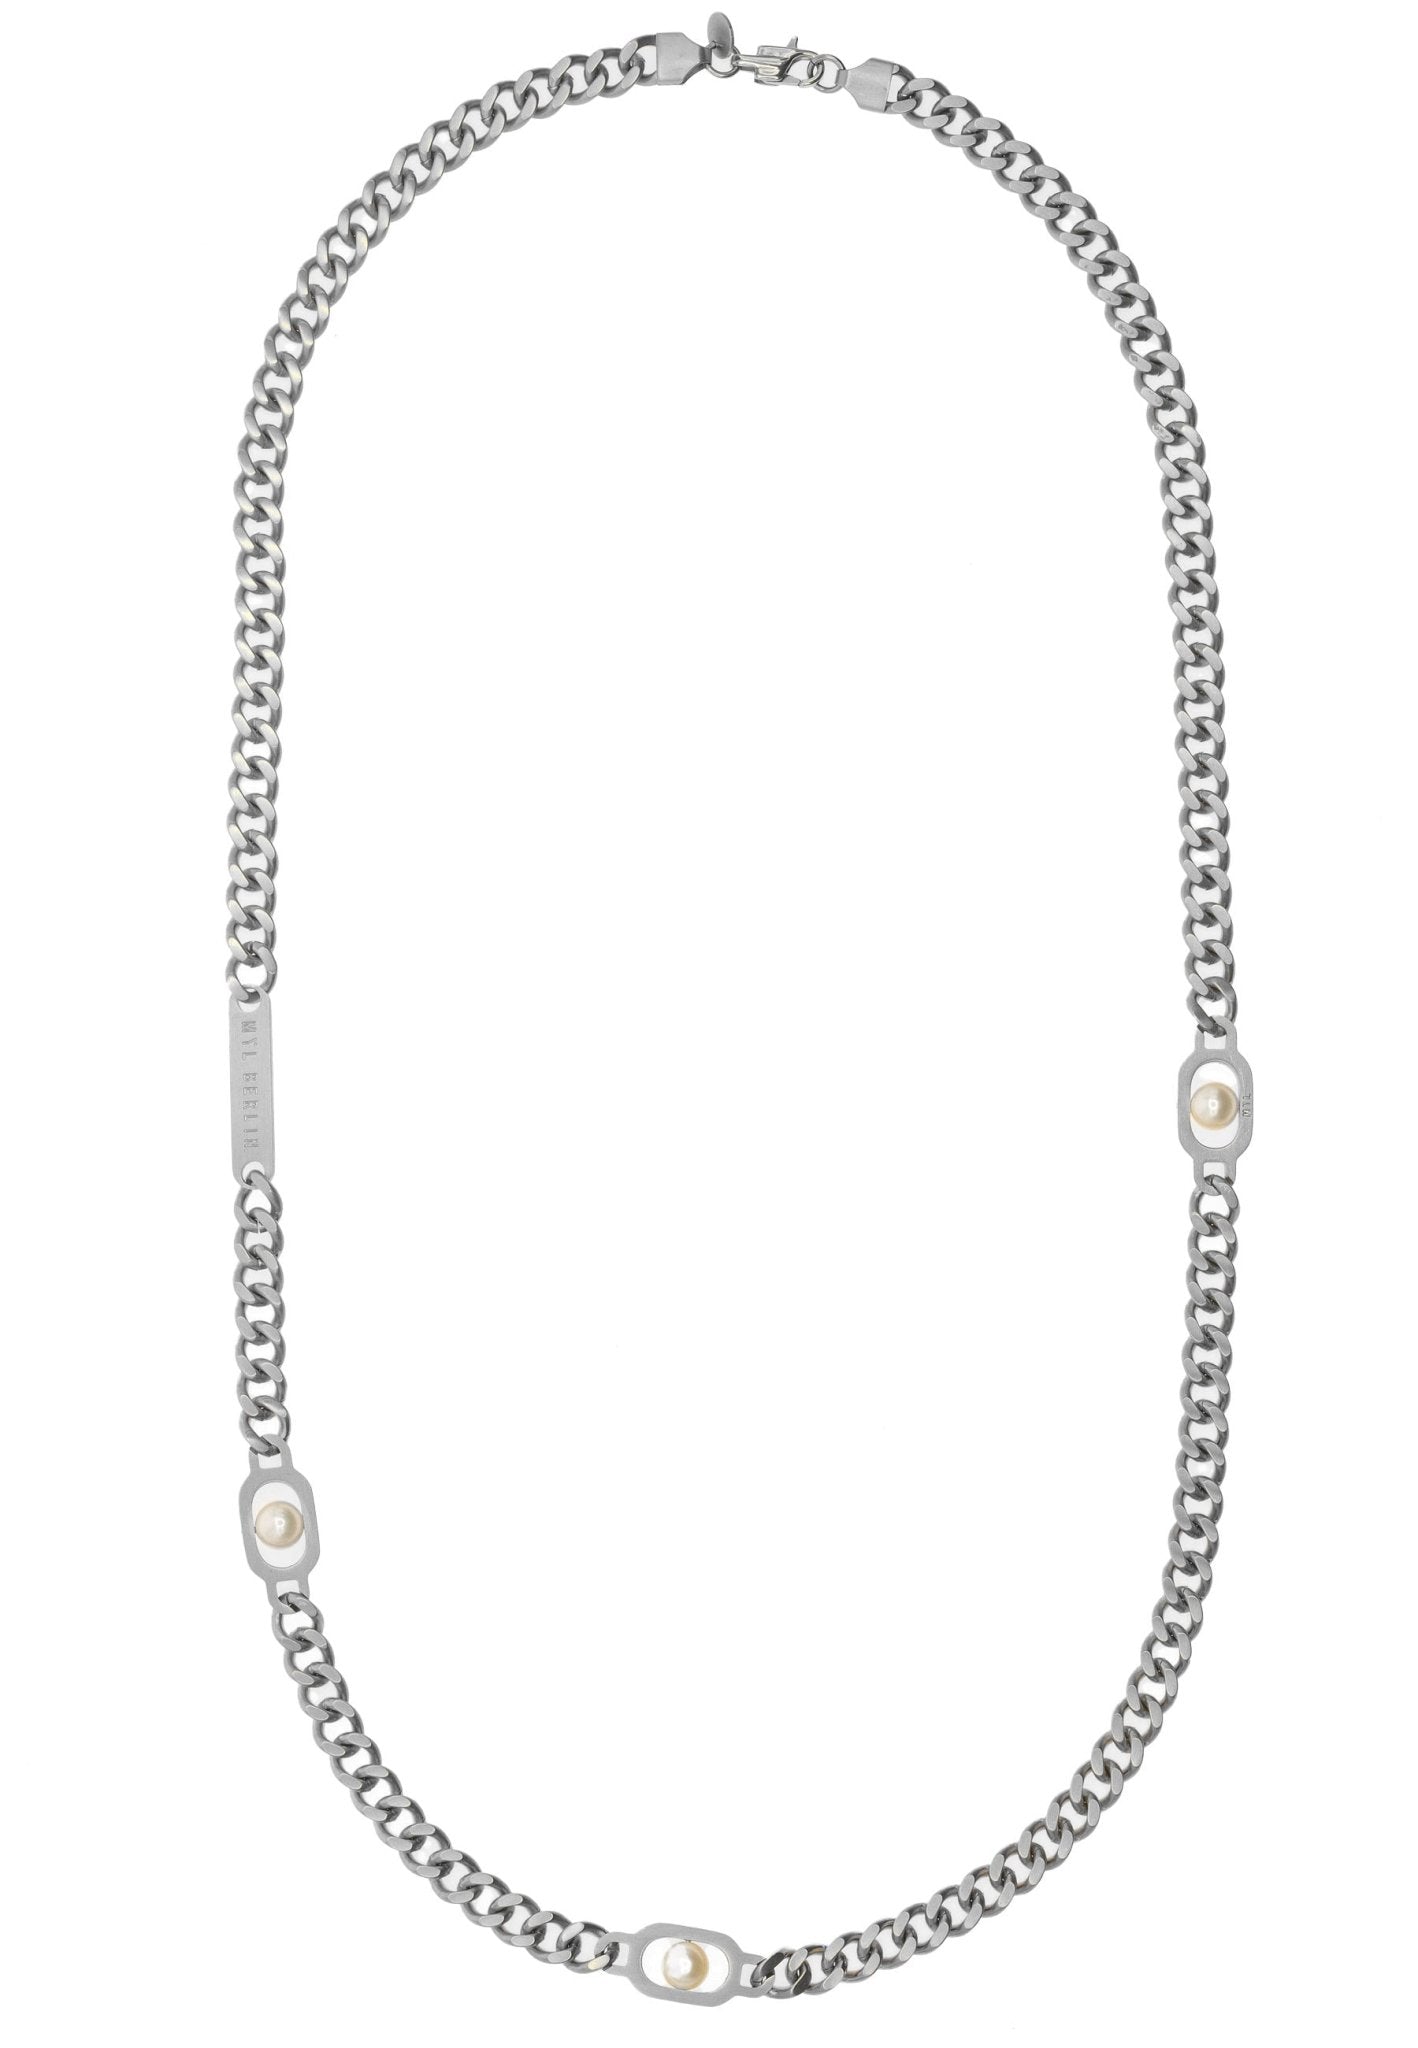 Thick Curb Chain Pearl Necklace - MYL BERLIN - 4260654111187 - 4260654111187